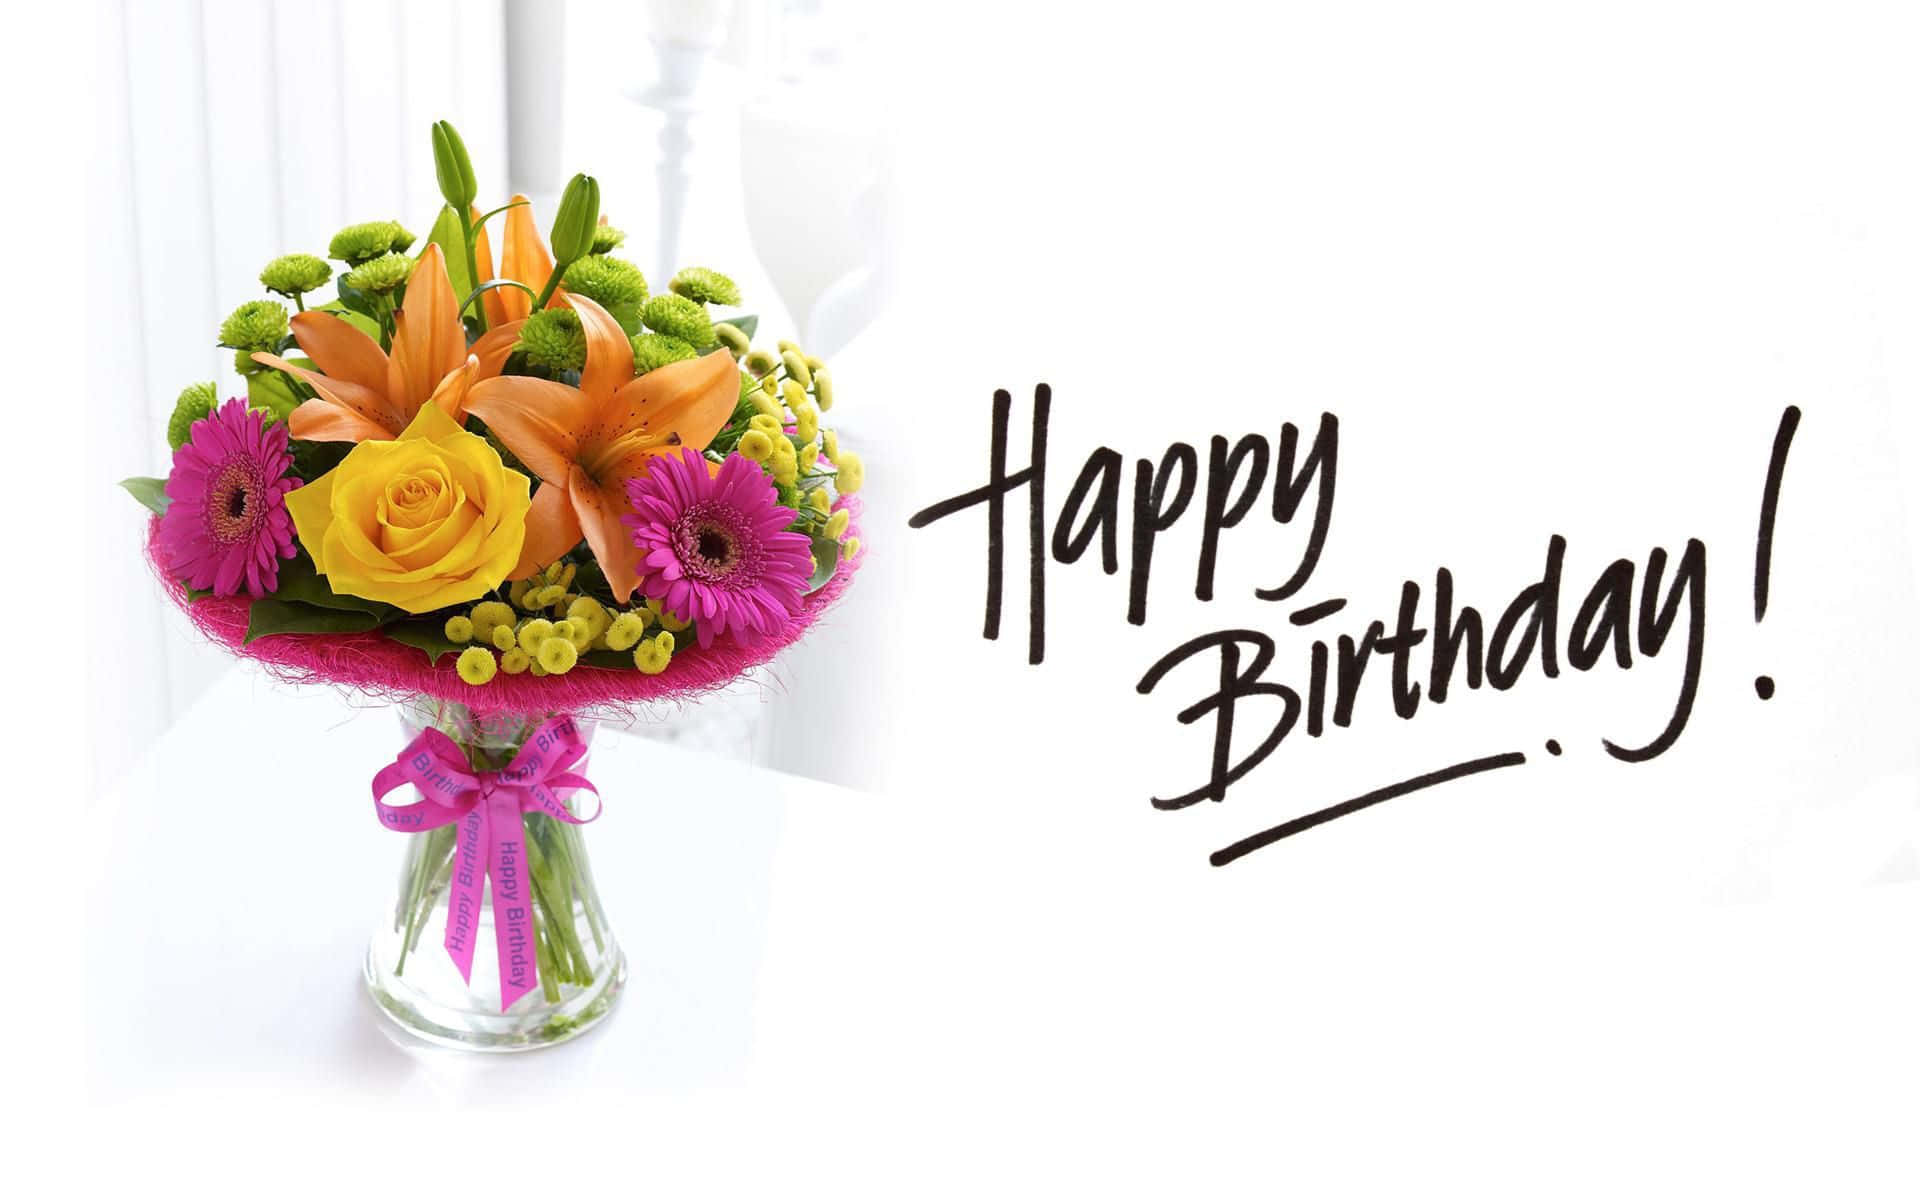 Simplistic Birthday Greeting And Flowers Picture